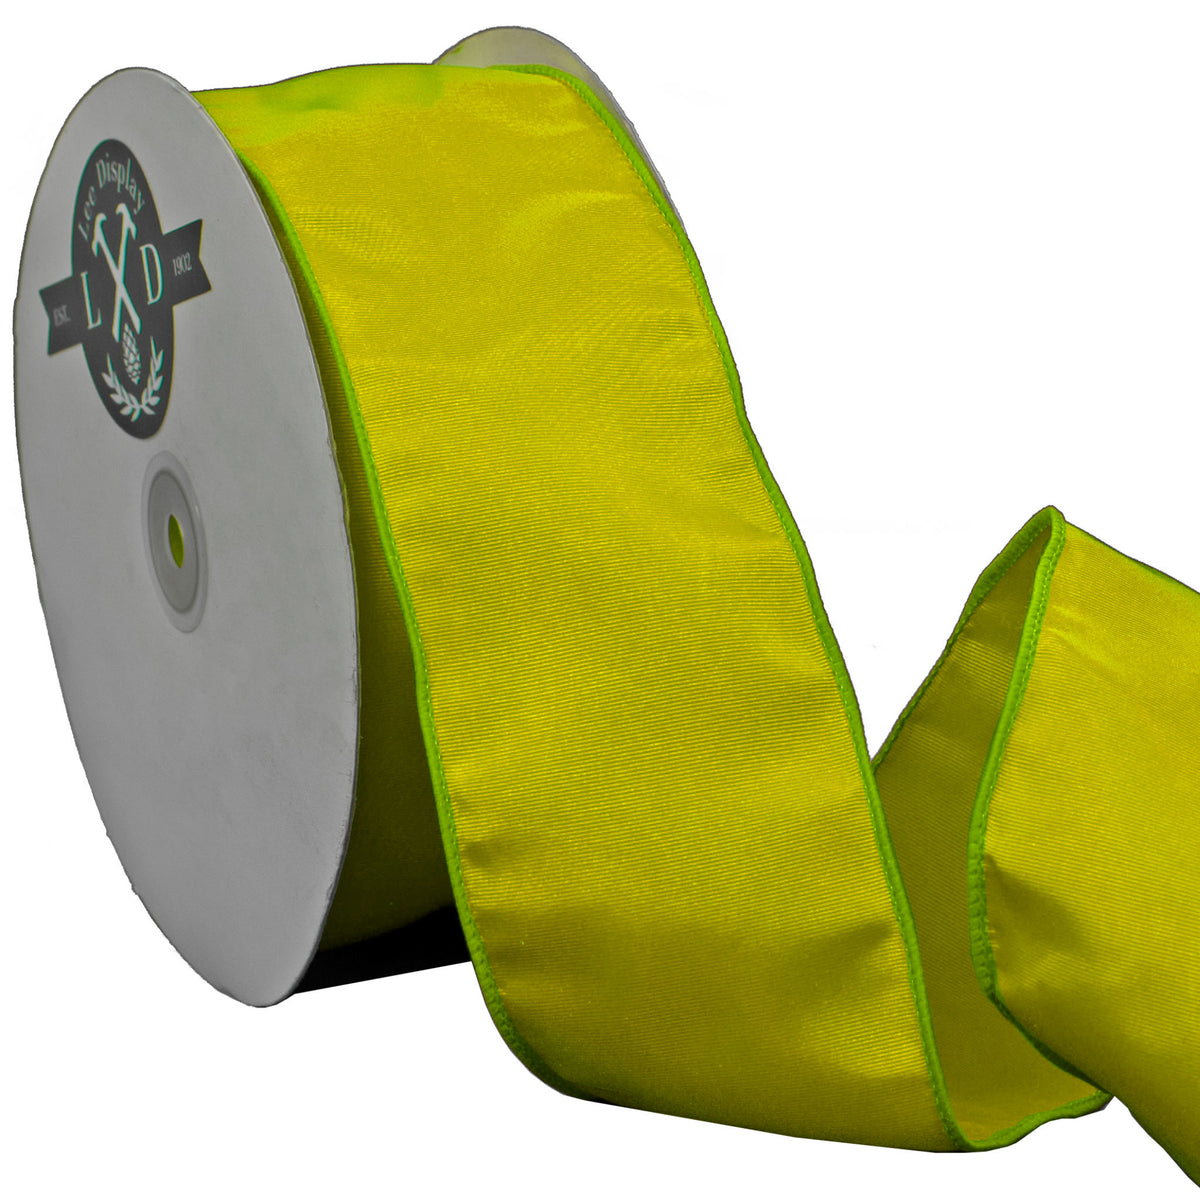 The Yellow Bengaline Christmas Ribbon comes with a Lime Green Wired Edge